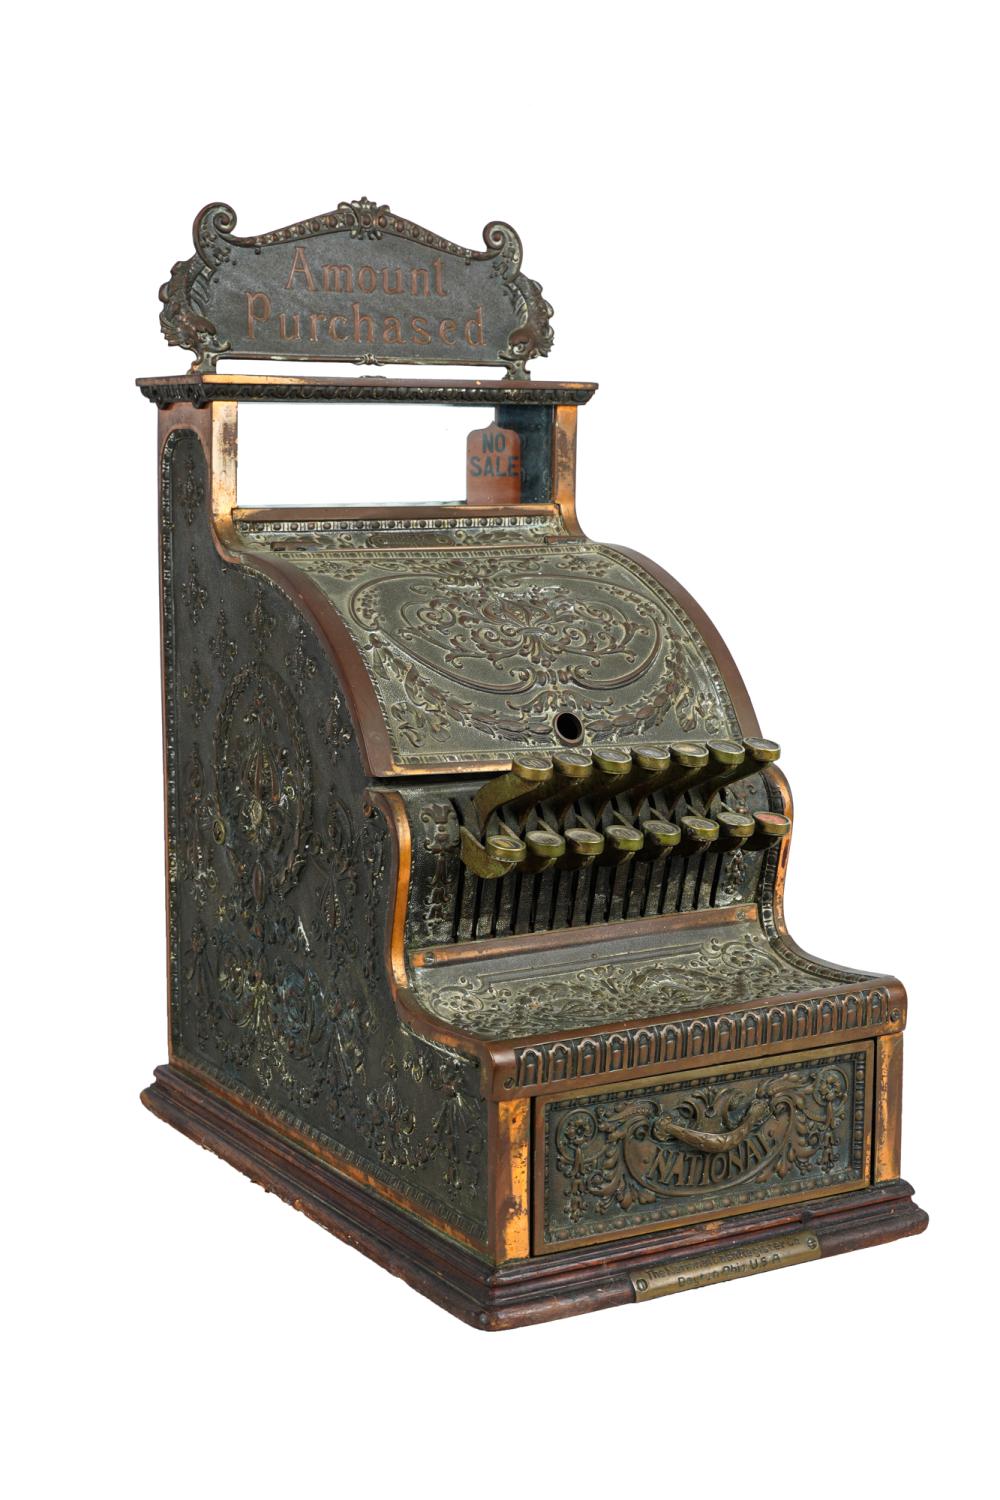 NATIONAL CASH REGISTER10 inches